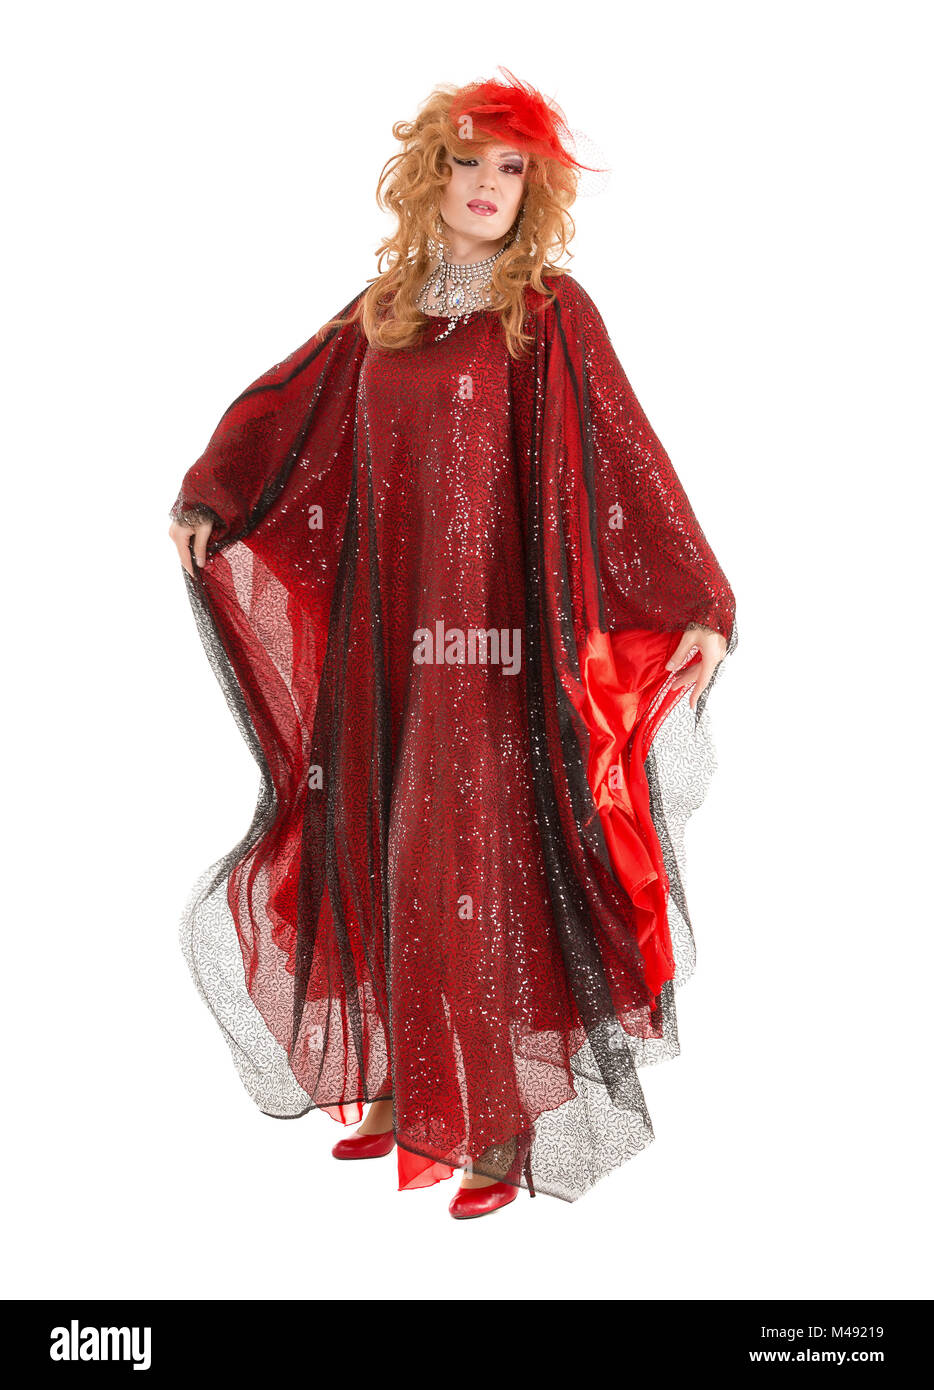 Portrait Drag Queen in Woman Red Dress Performing Stock Photo